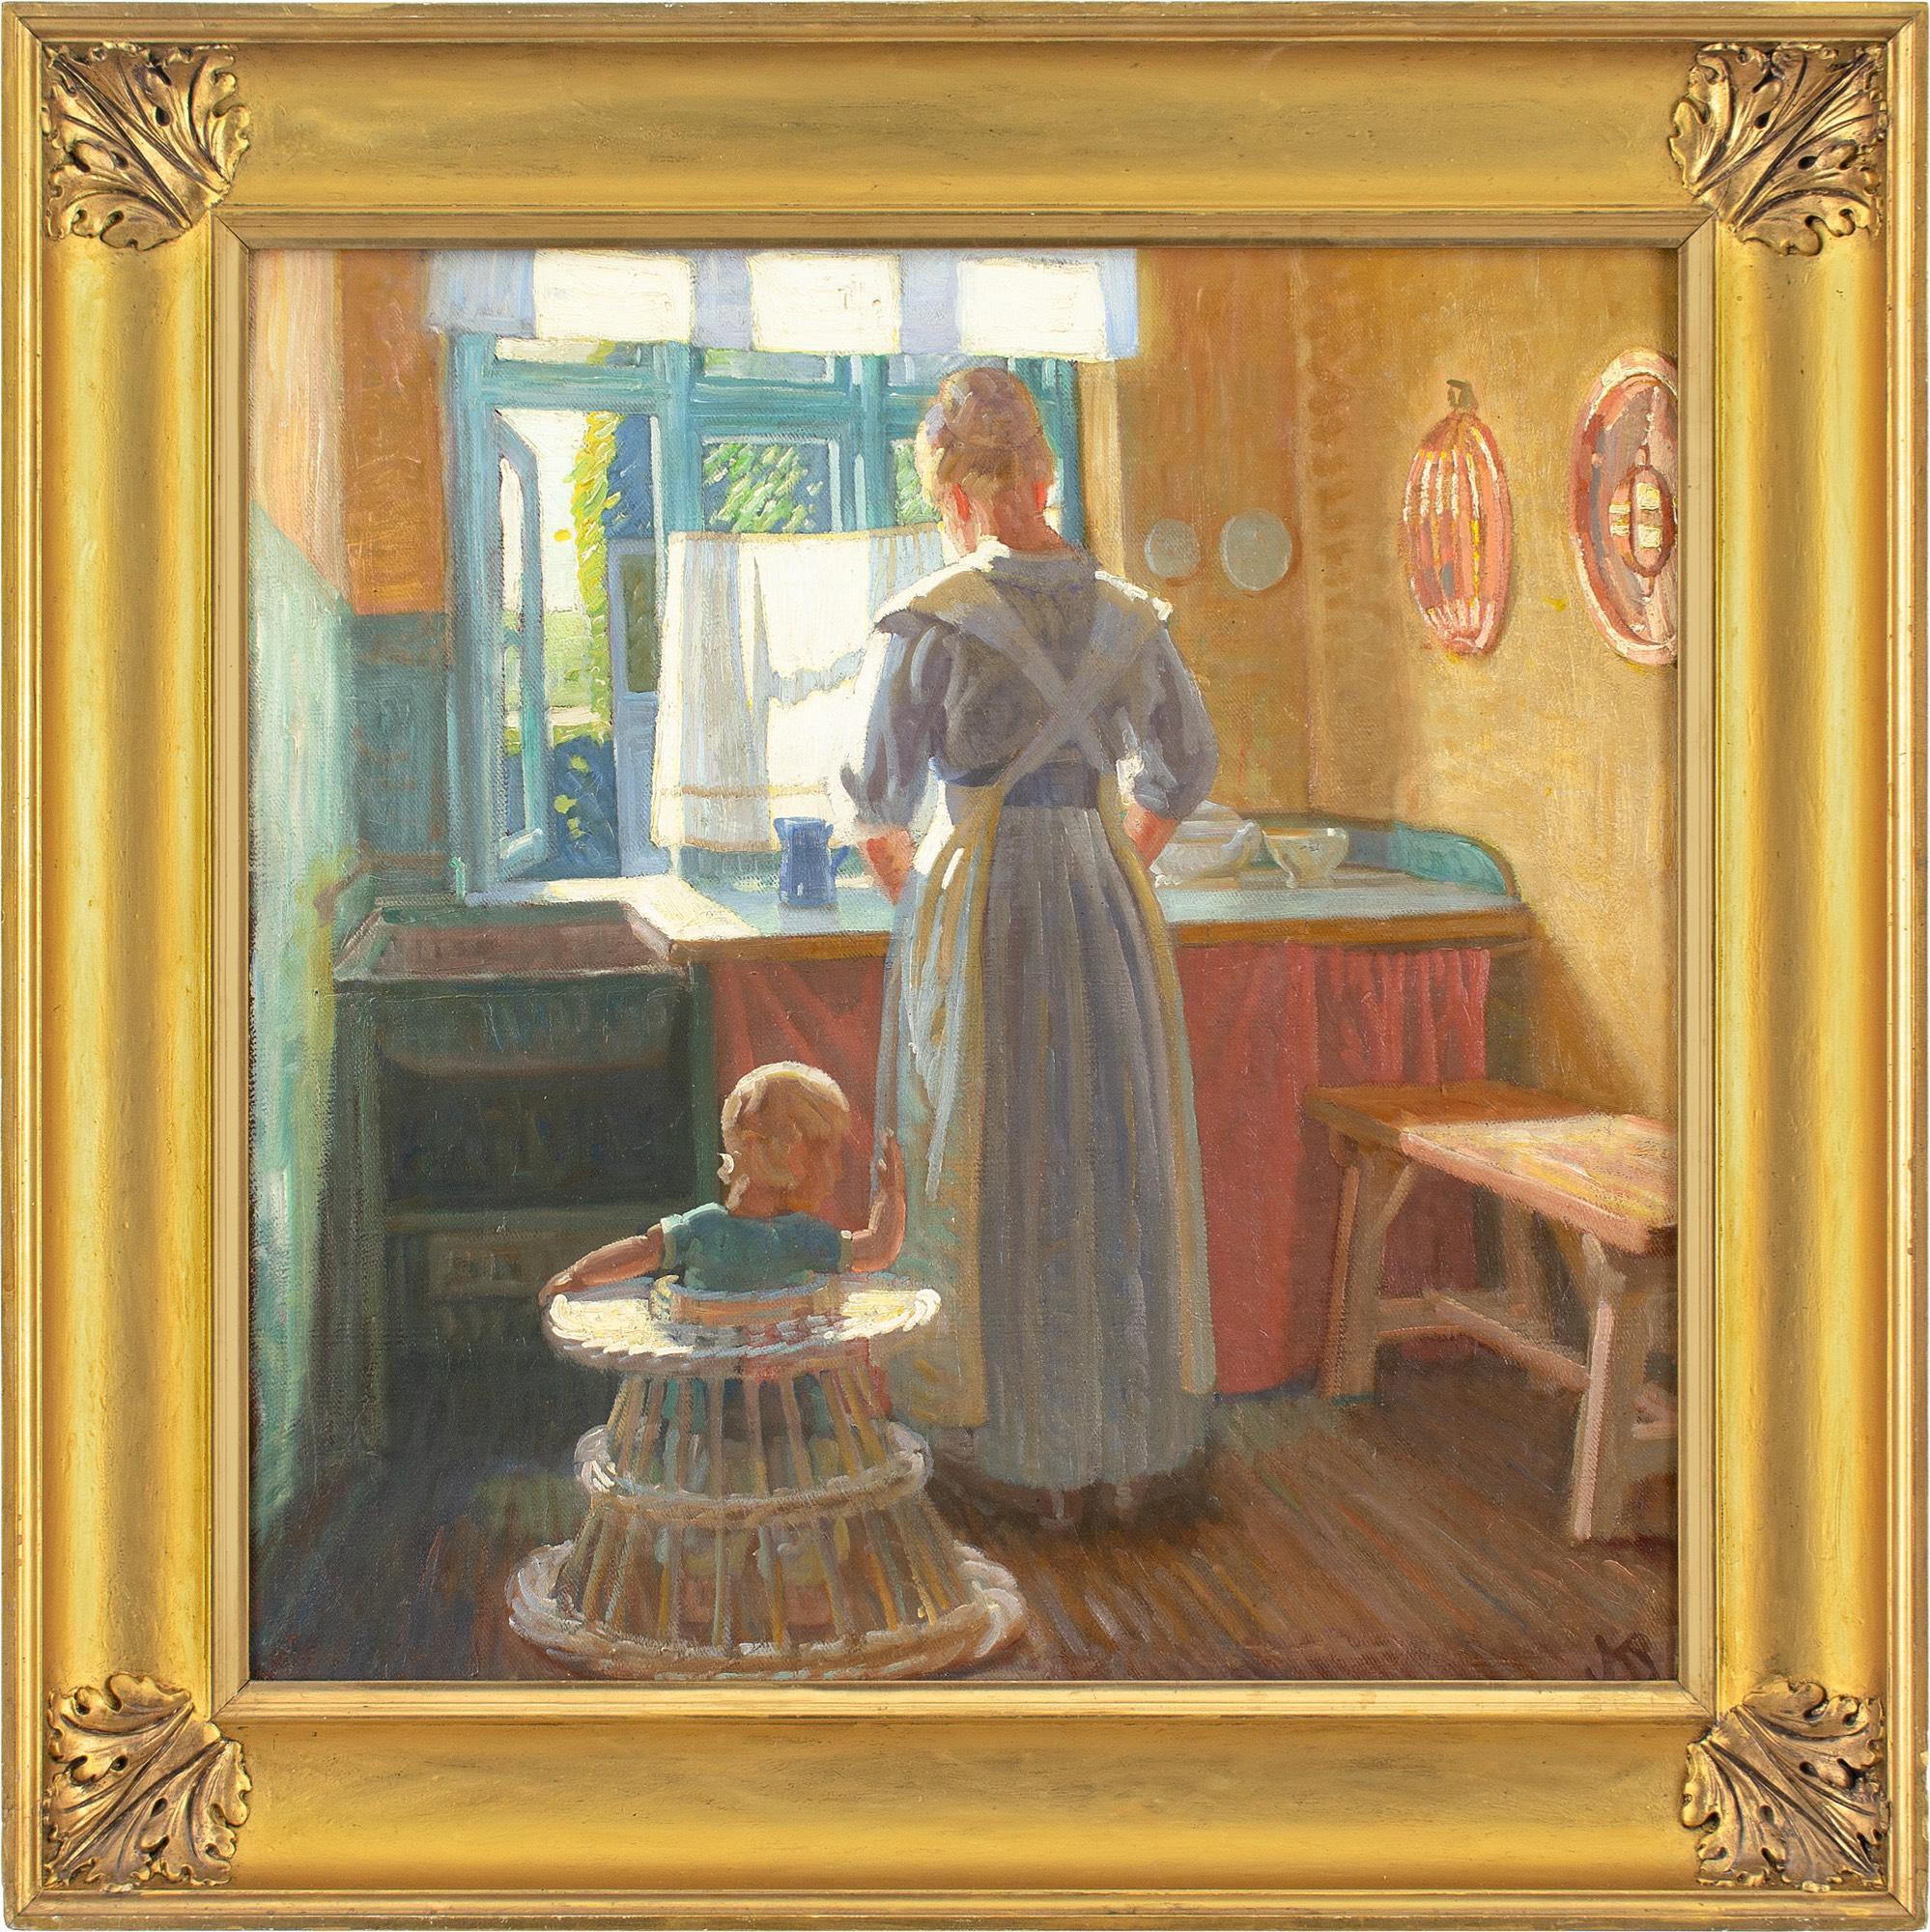 This charming early-20th-century oil painting by Danish artist Knud Sinding (1898-1947) depicts a kitchen interior with mother and child.

A gentle breeze passes through the kitchen window. The room partially illuminated by a crisp glow. Looking